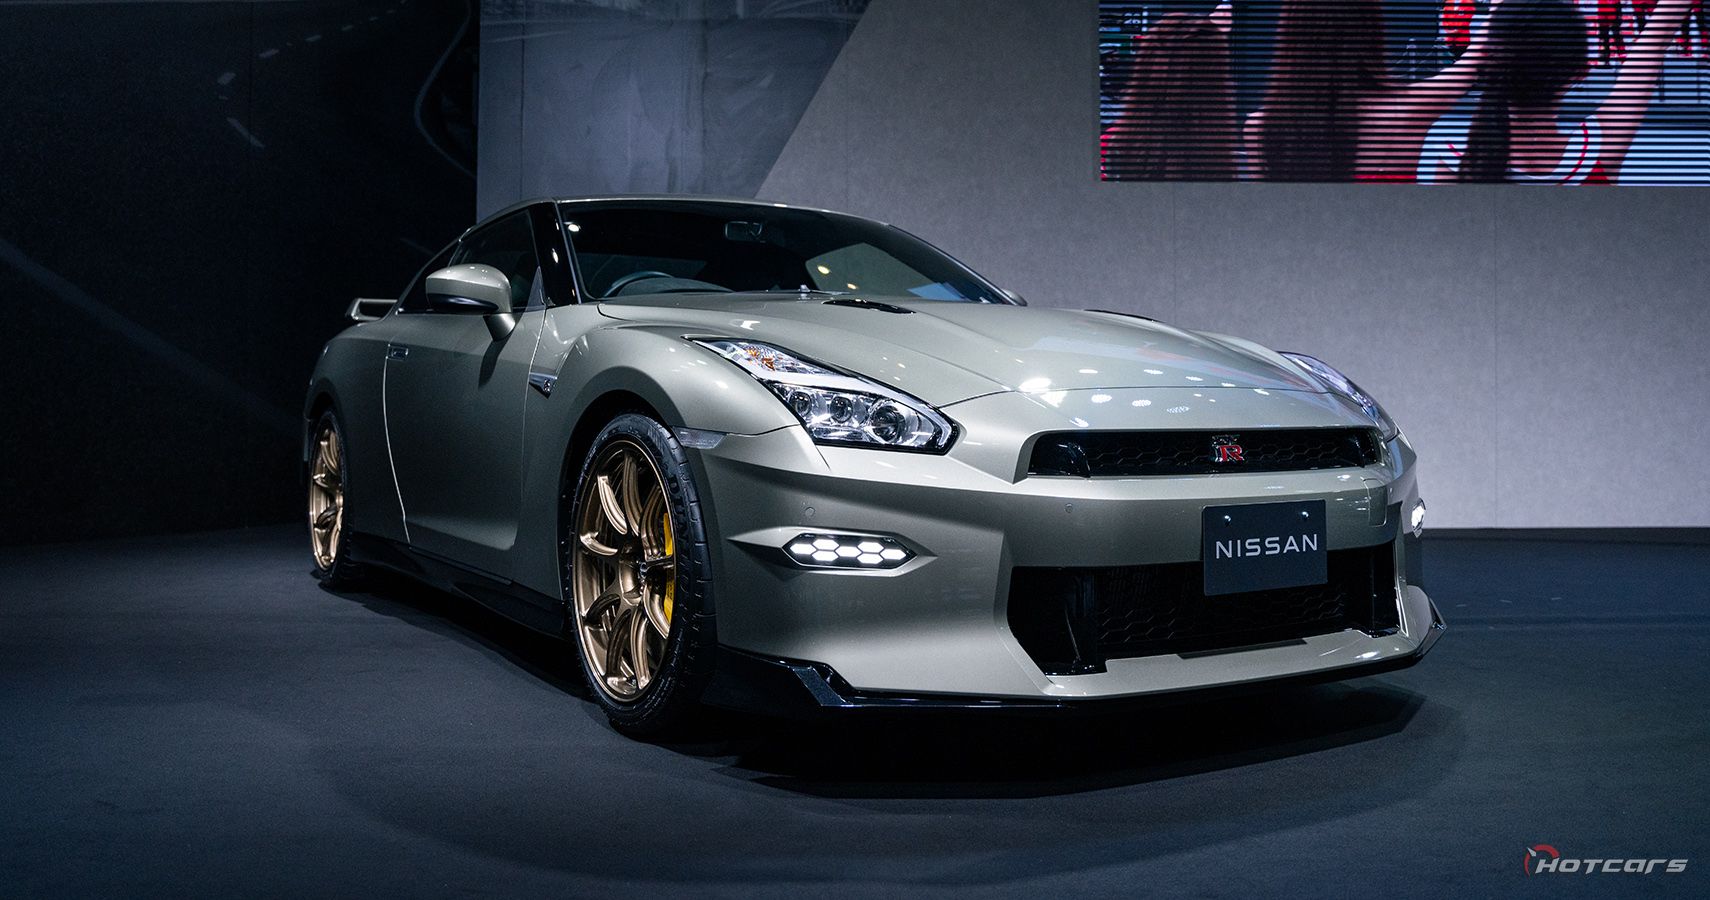 Here's what form a future, next-generation electric Nissan GT-R could take